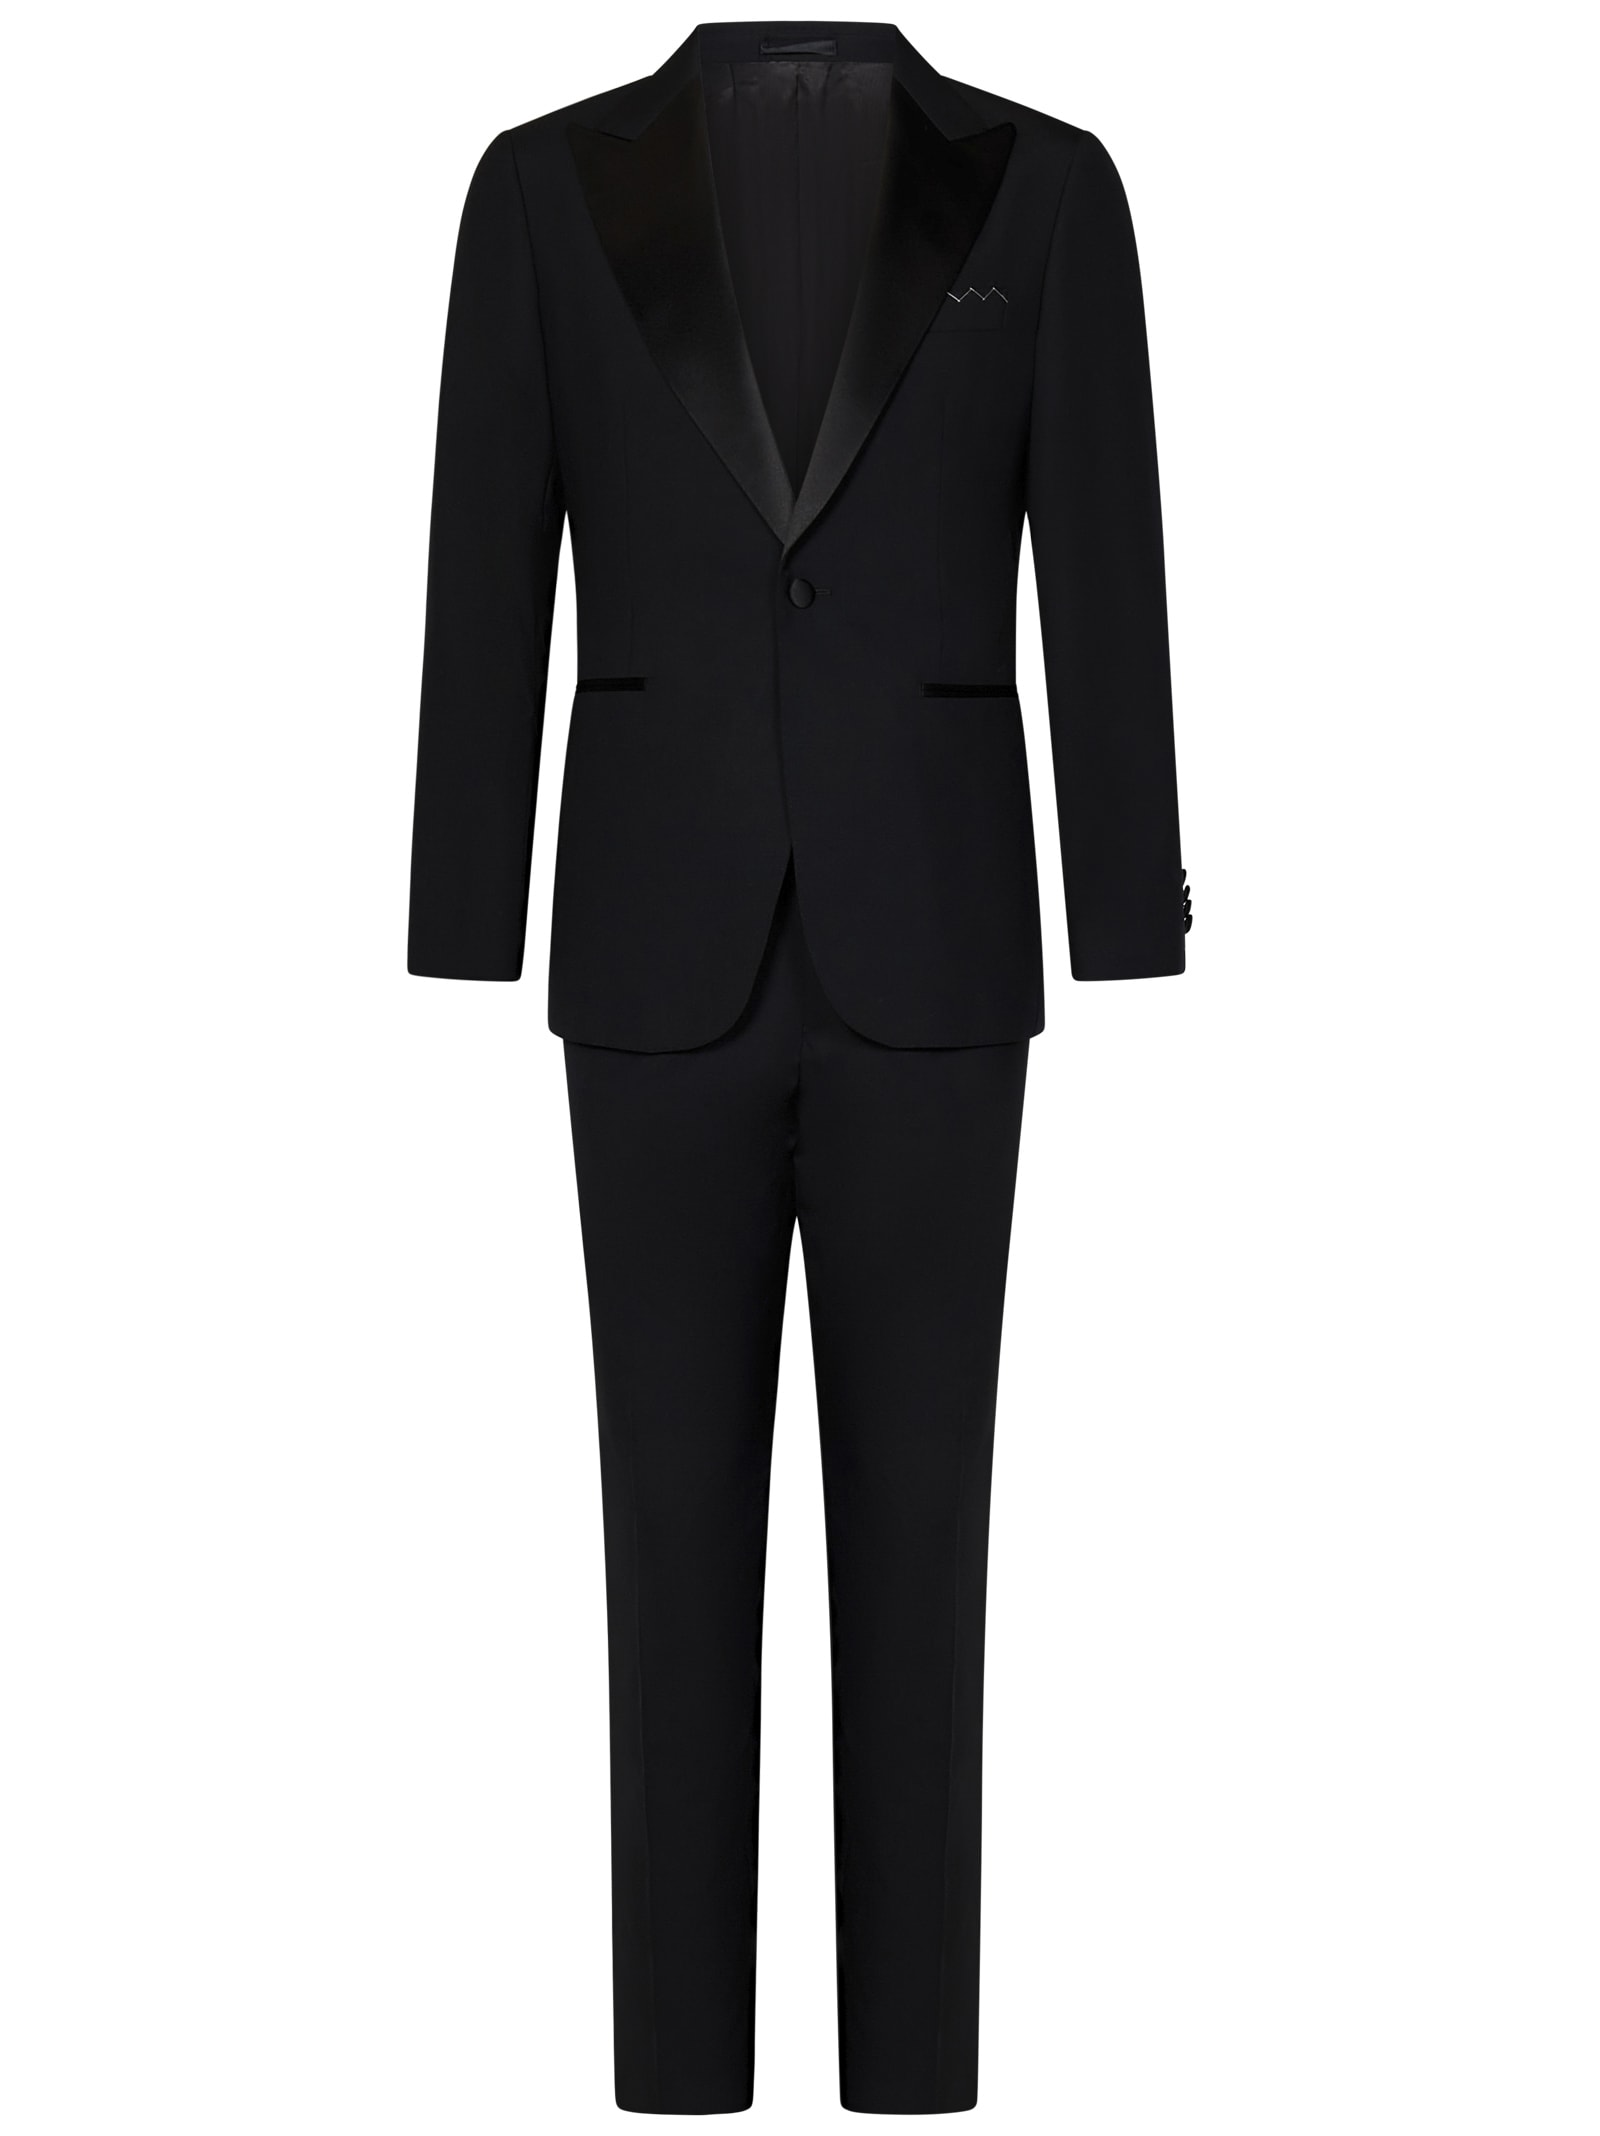 Low Brand Suit In Black